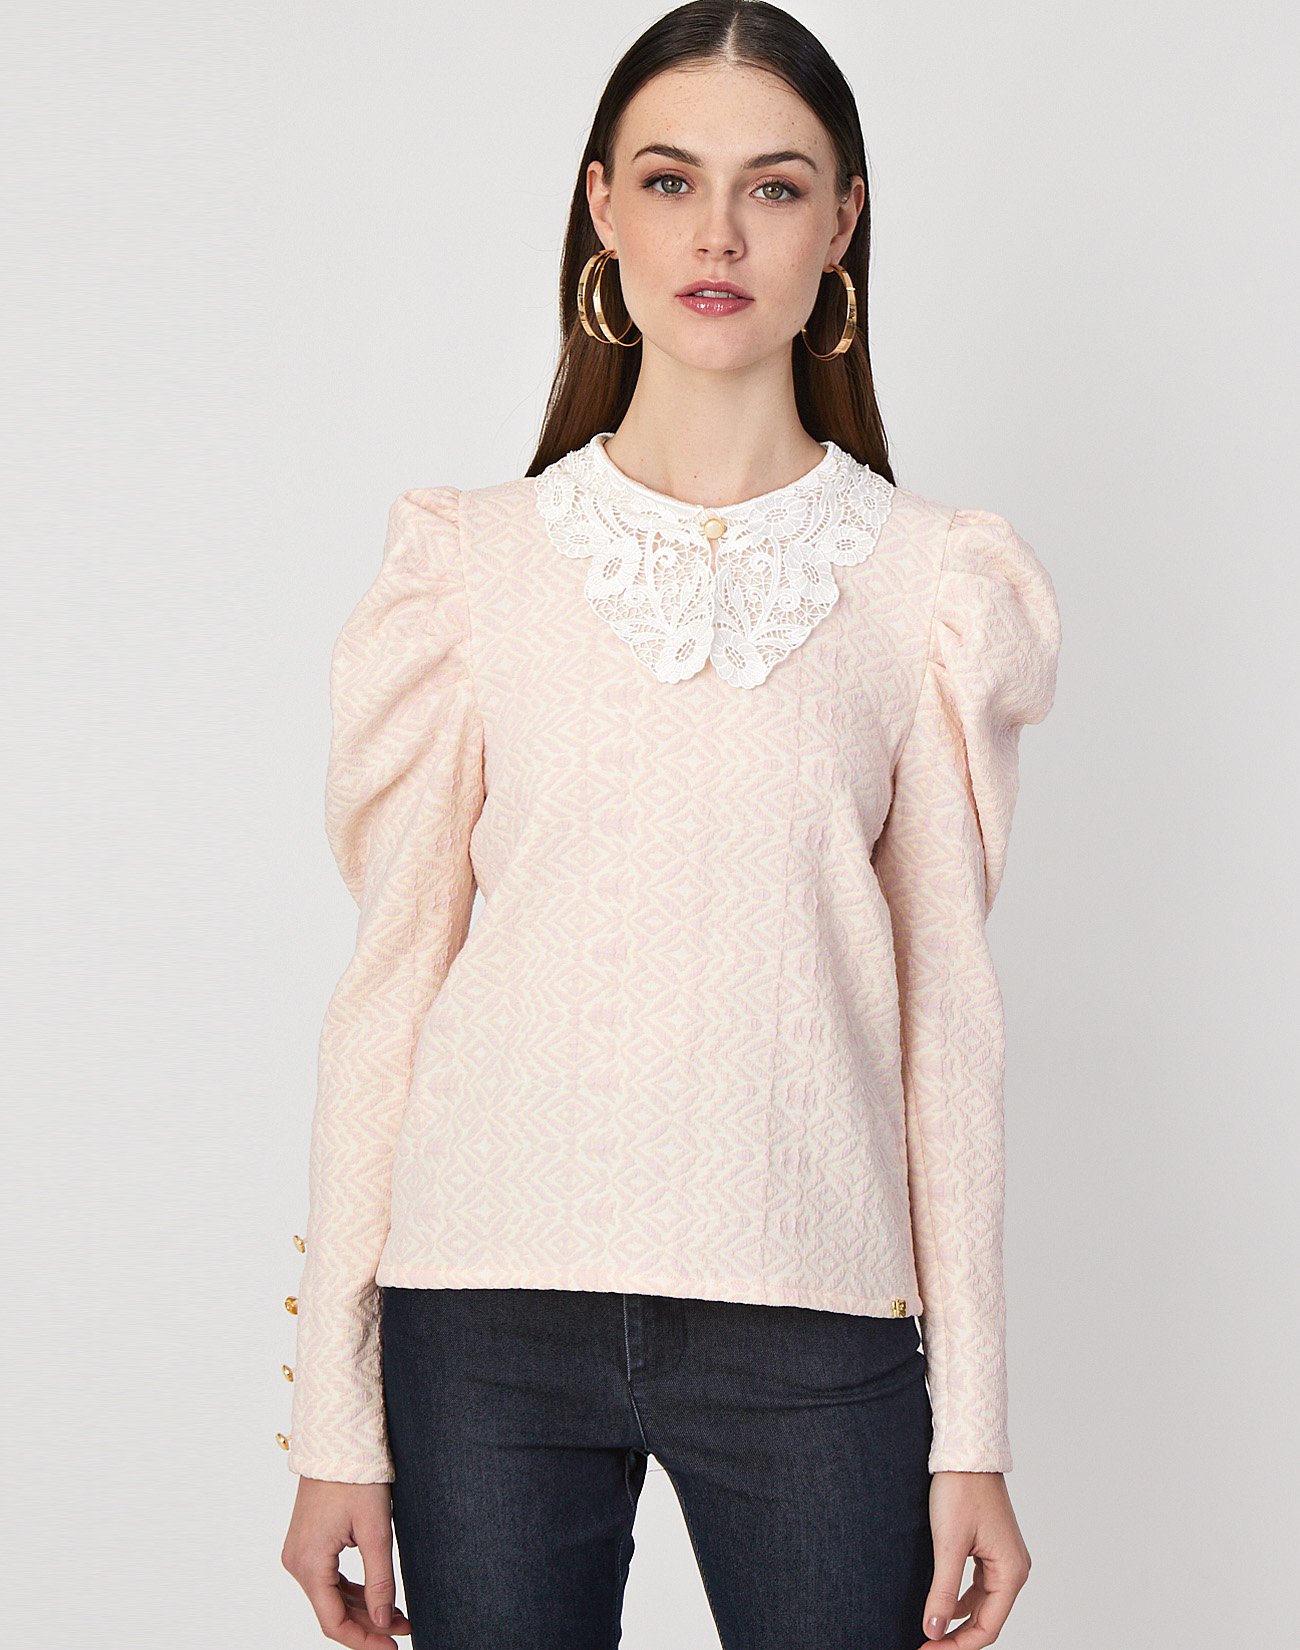 Jacquard top with lace